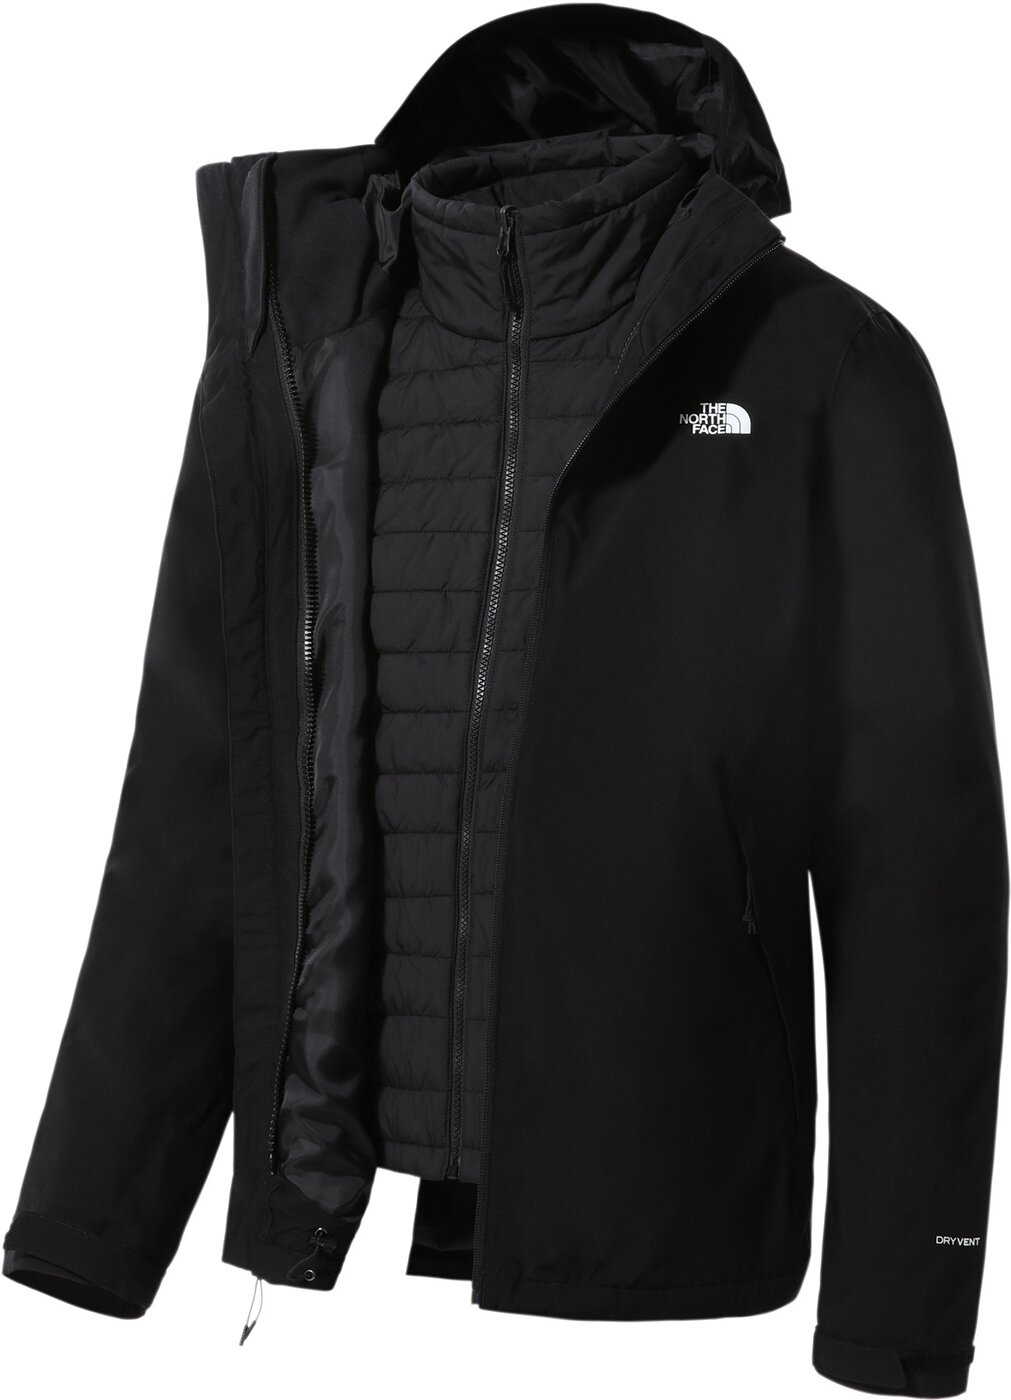 THE NORTH JACKET JK3 Black kaufen TNF TRICLIMATE online CARTO FACE W